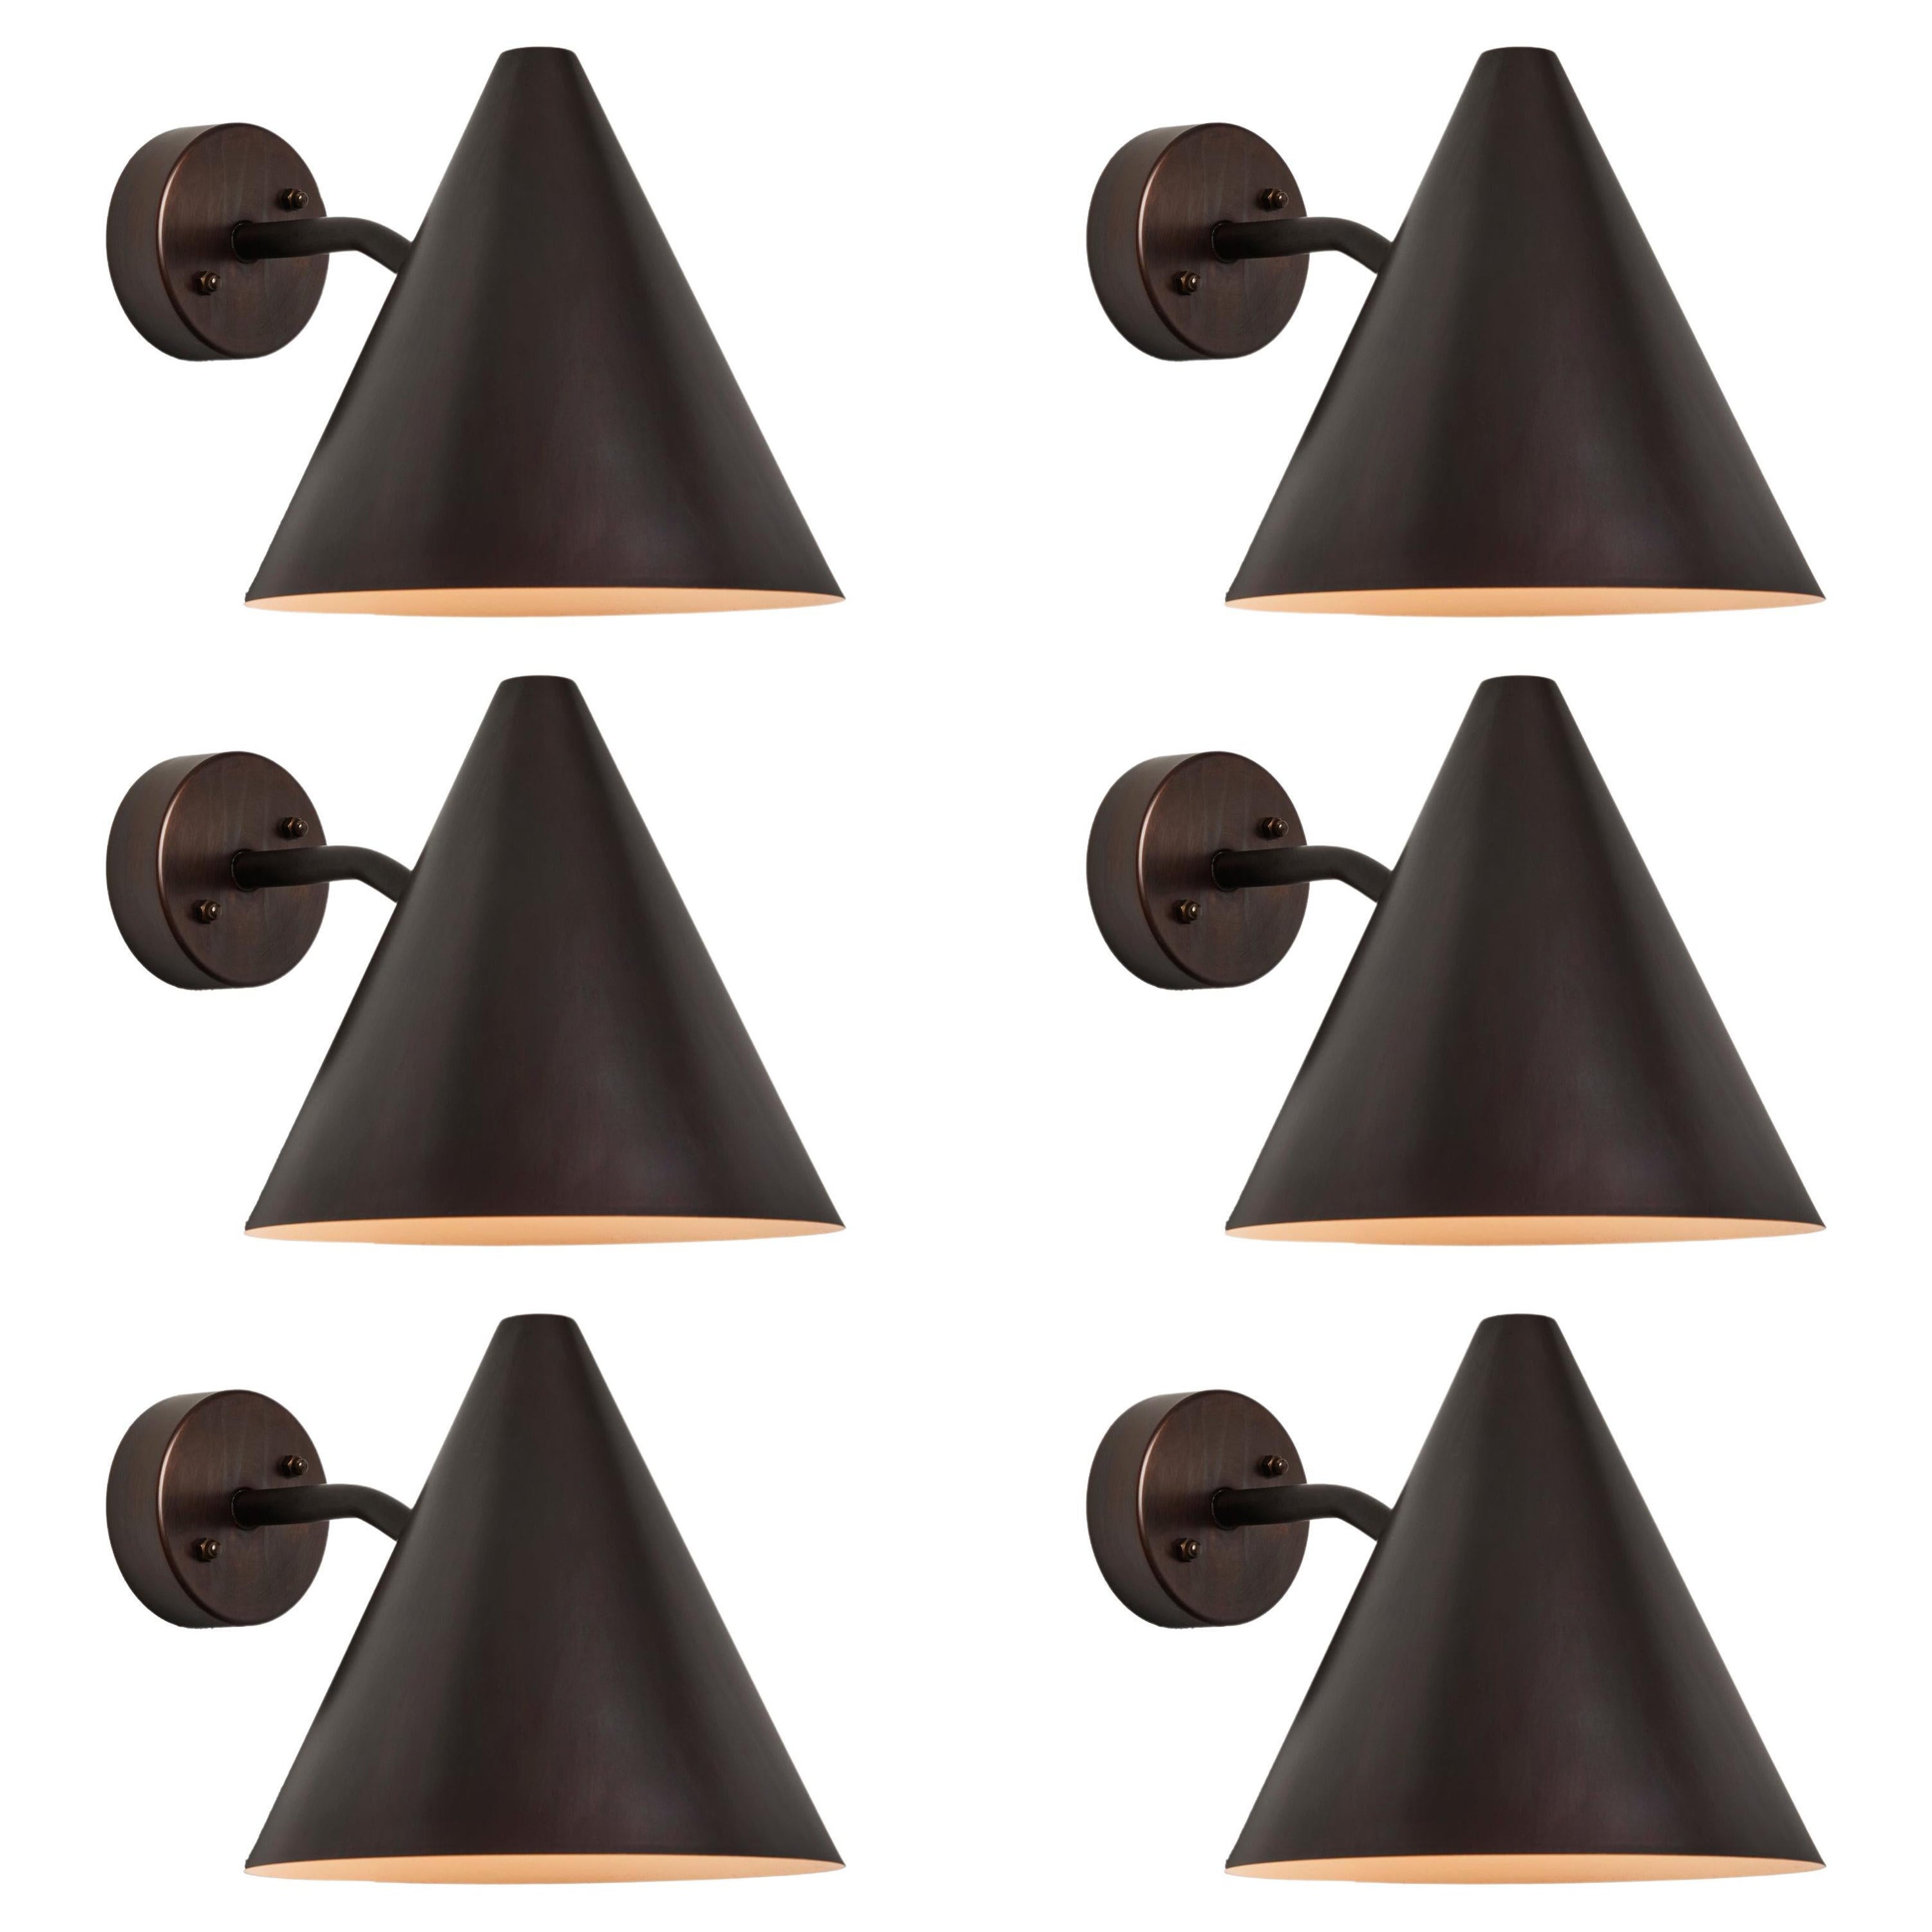 Hans-Agne Jakobsson 'Tratten' Dark Brown Patinated Outdoor Sconce For Sale